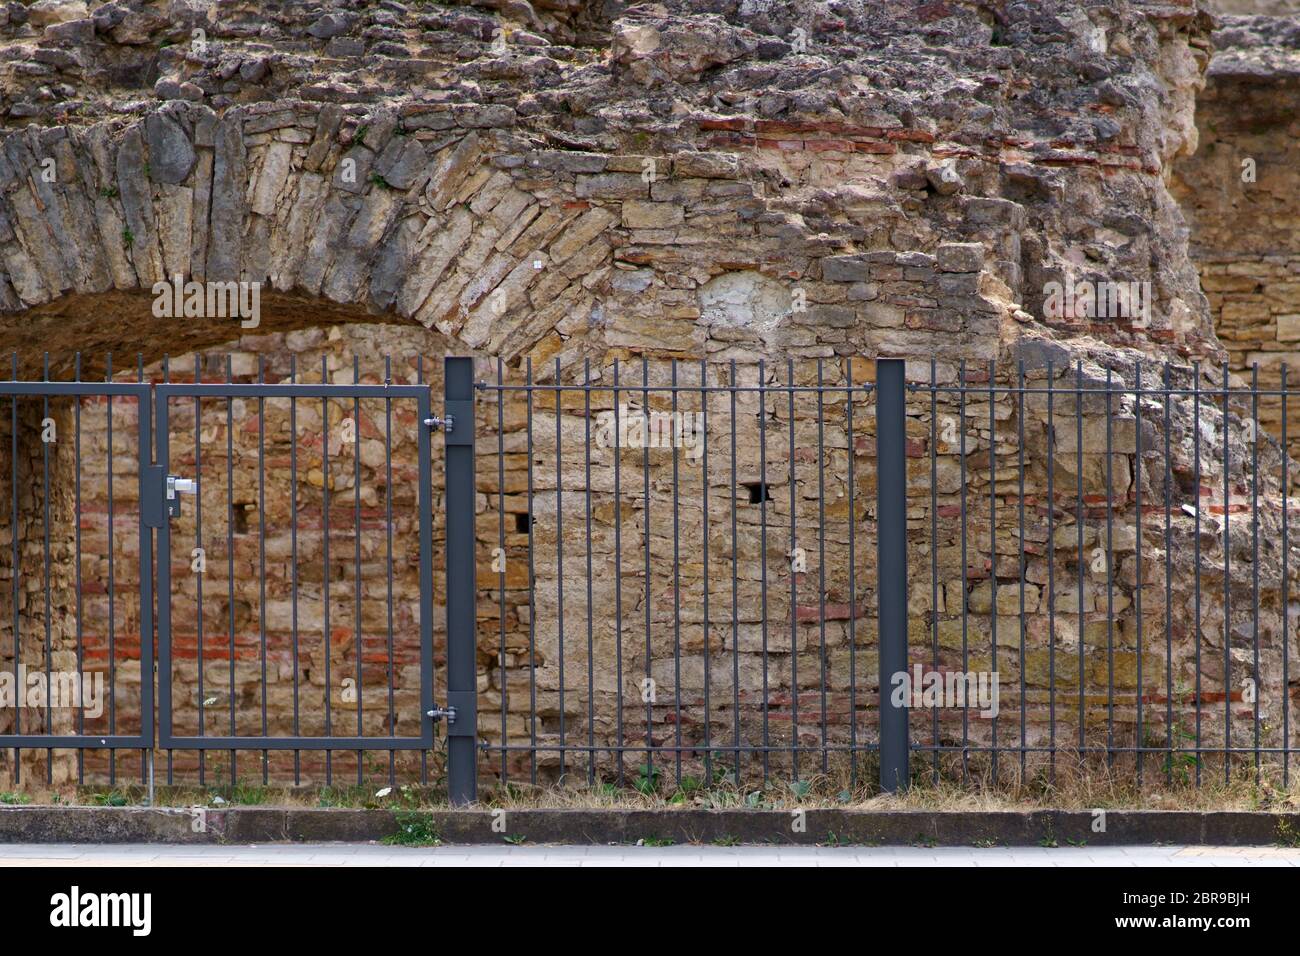 A fence with a door in front of the ancient walls of a Roman amphitheater. Stock Photo